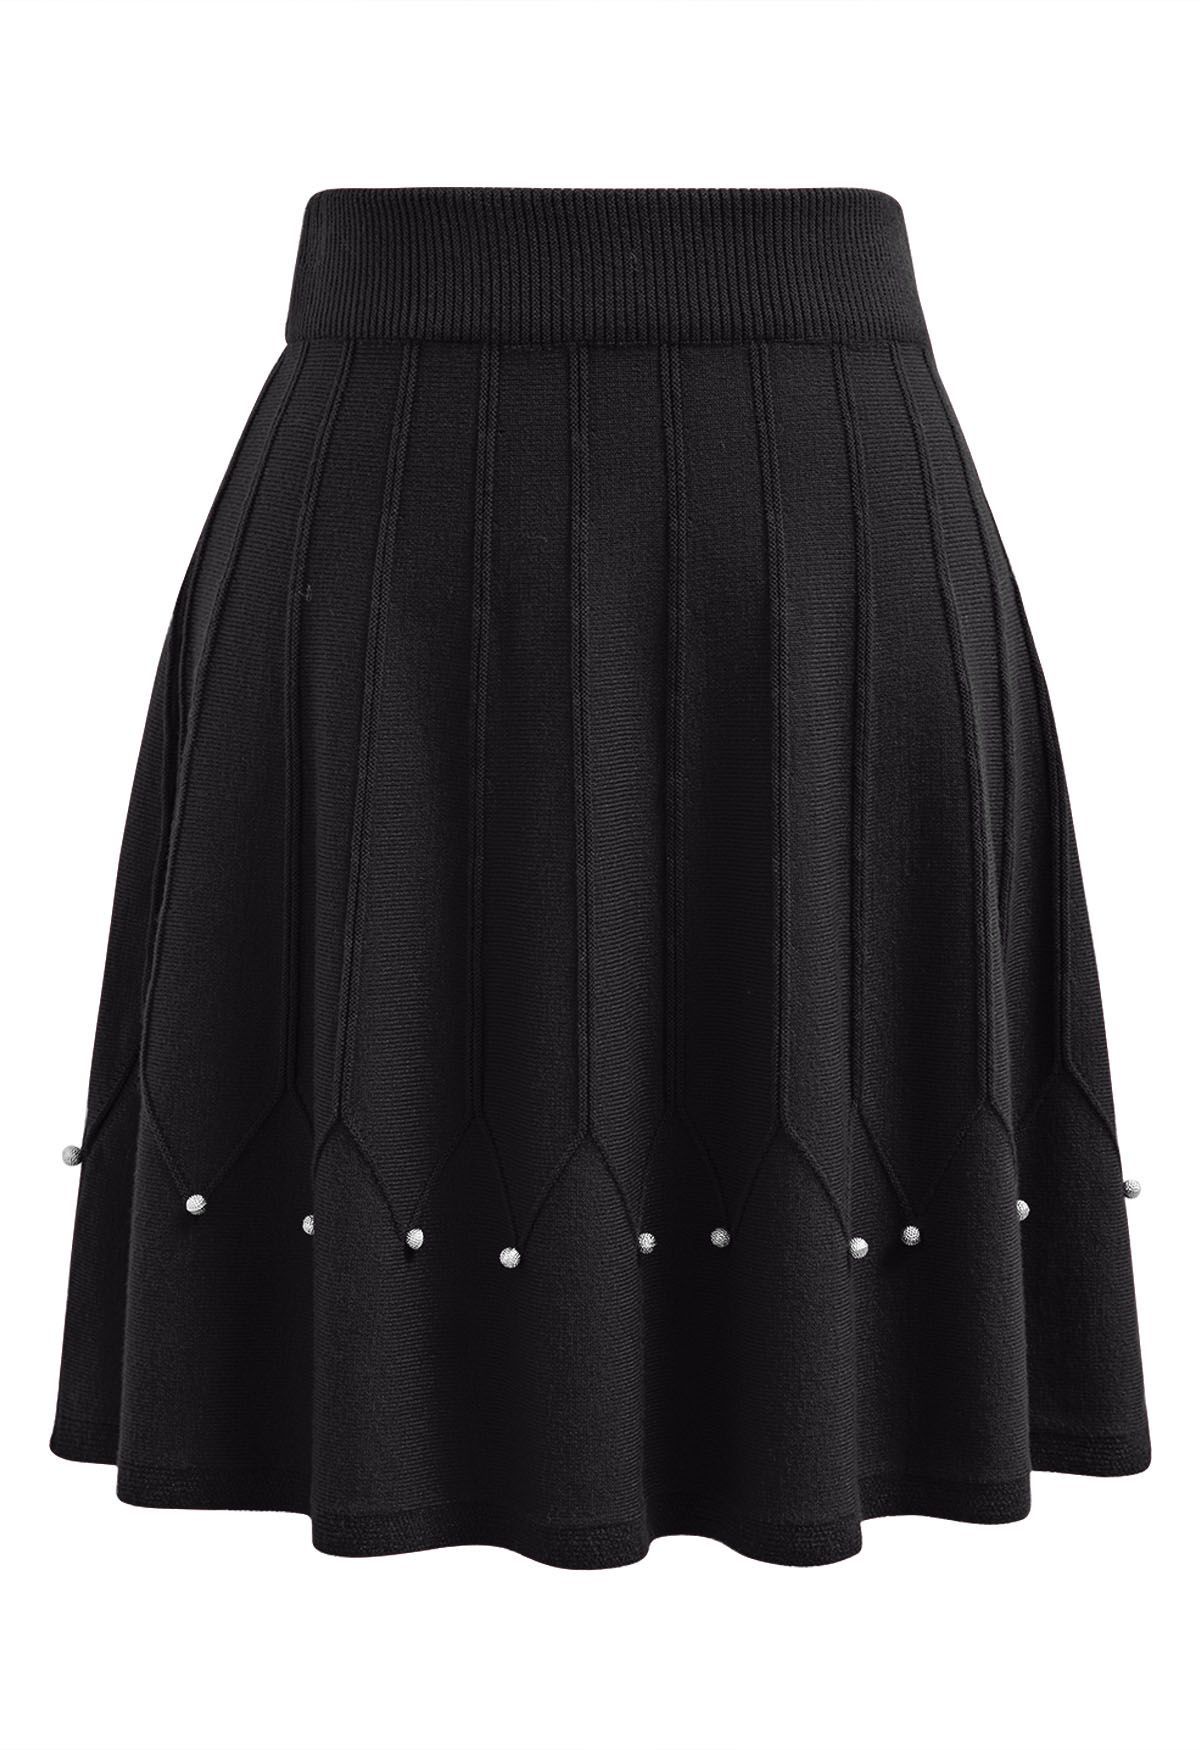 Silver Bead Embellished Seam Knit Skirt in Black - Retro, Indie and ...